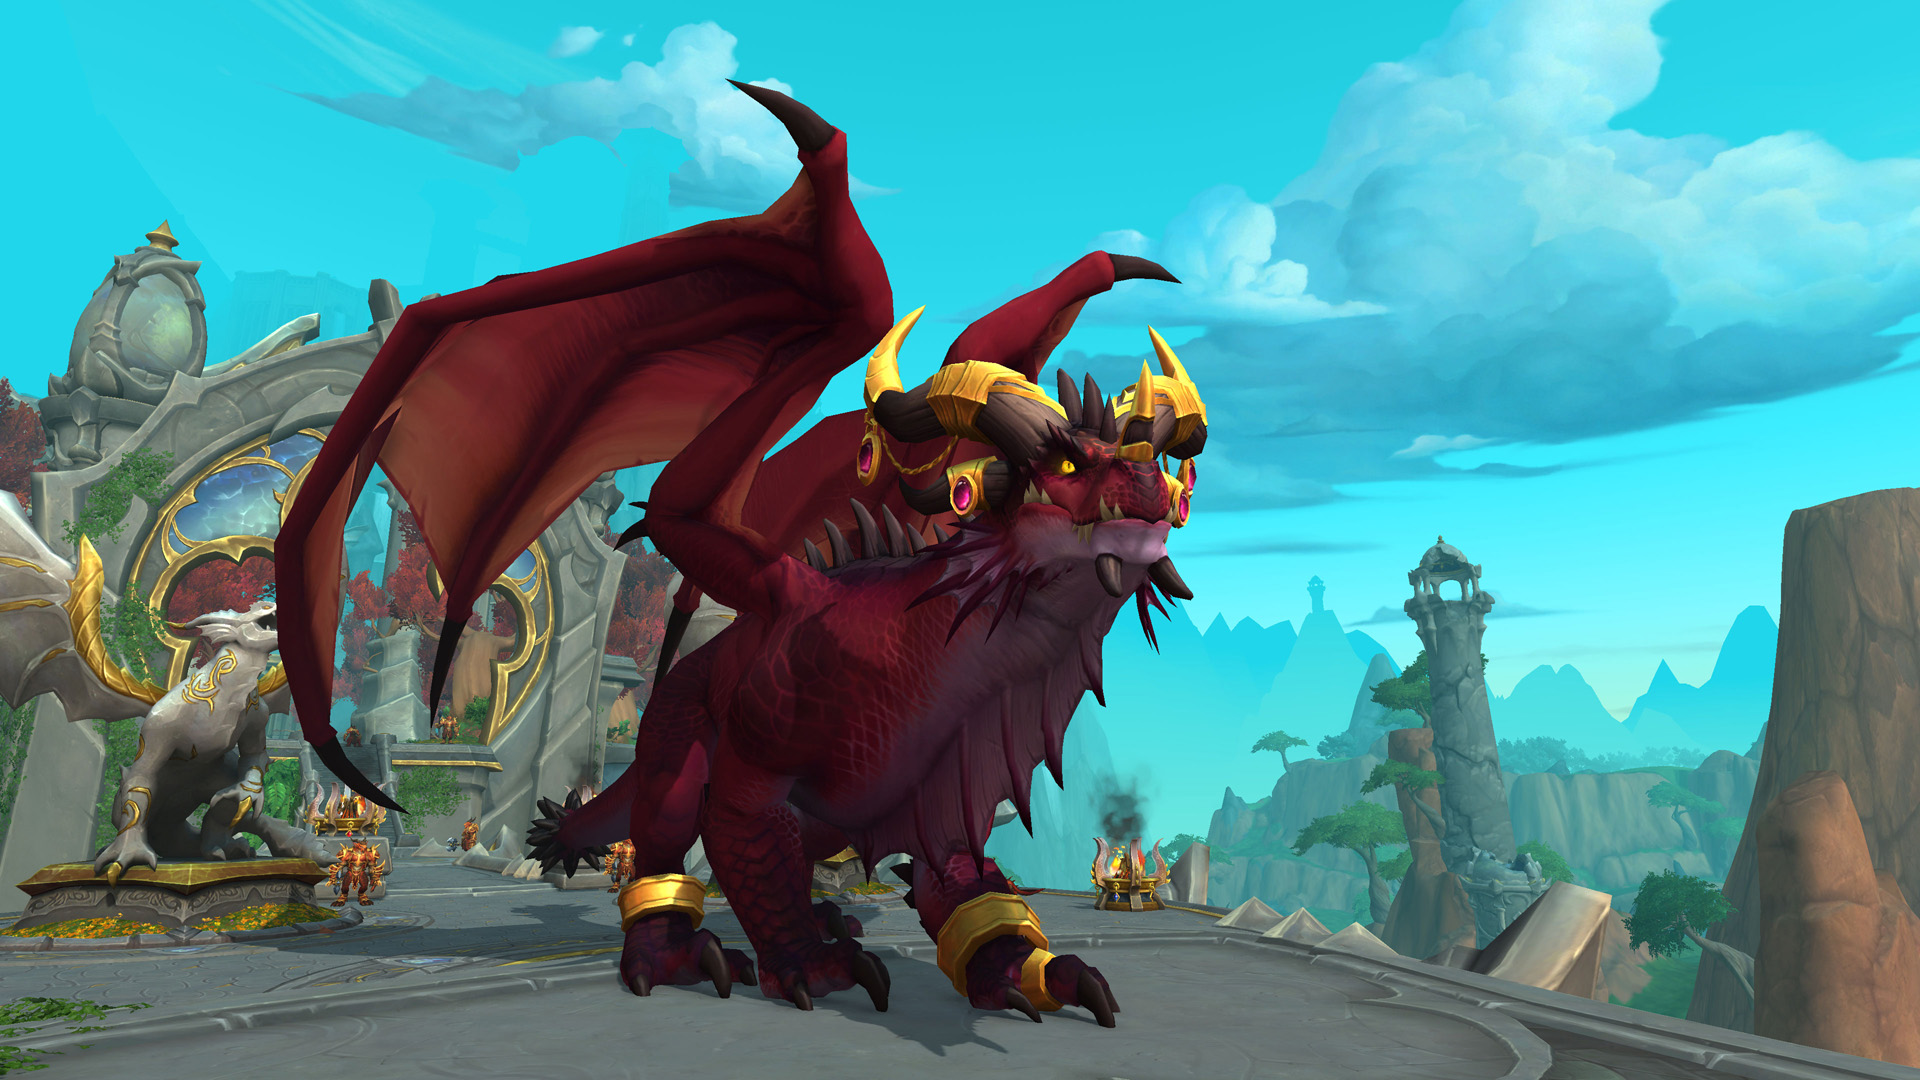 World of Warcraft: Dragonflight - the Dragon Queen Alexstrasza stands in the Dragon Isles